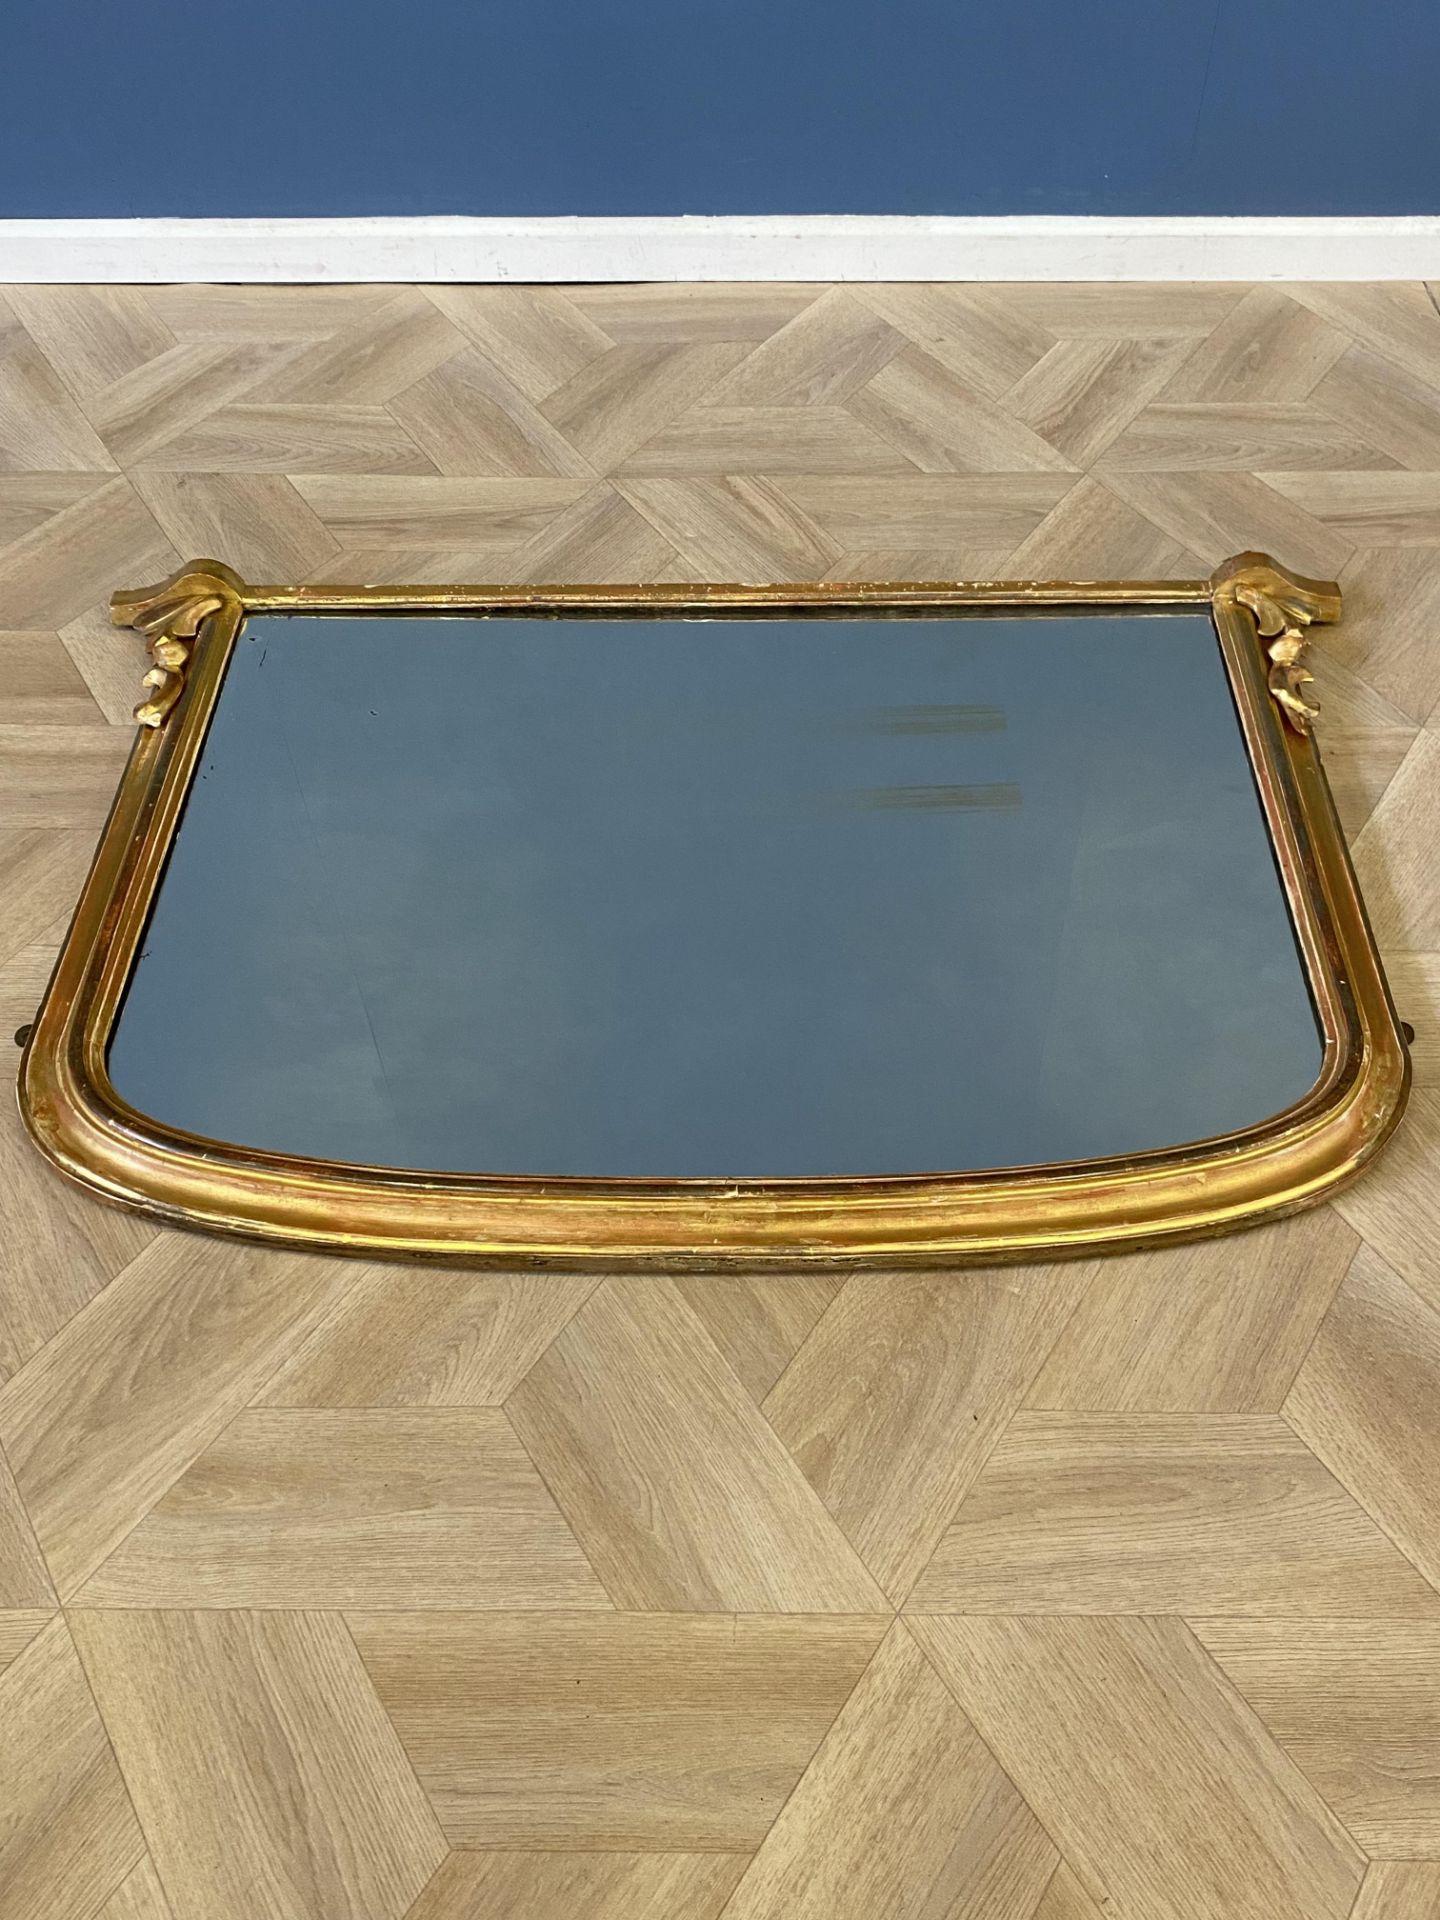 Victorian gilded overmantle mirror - Image 3 of 5